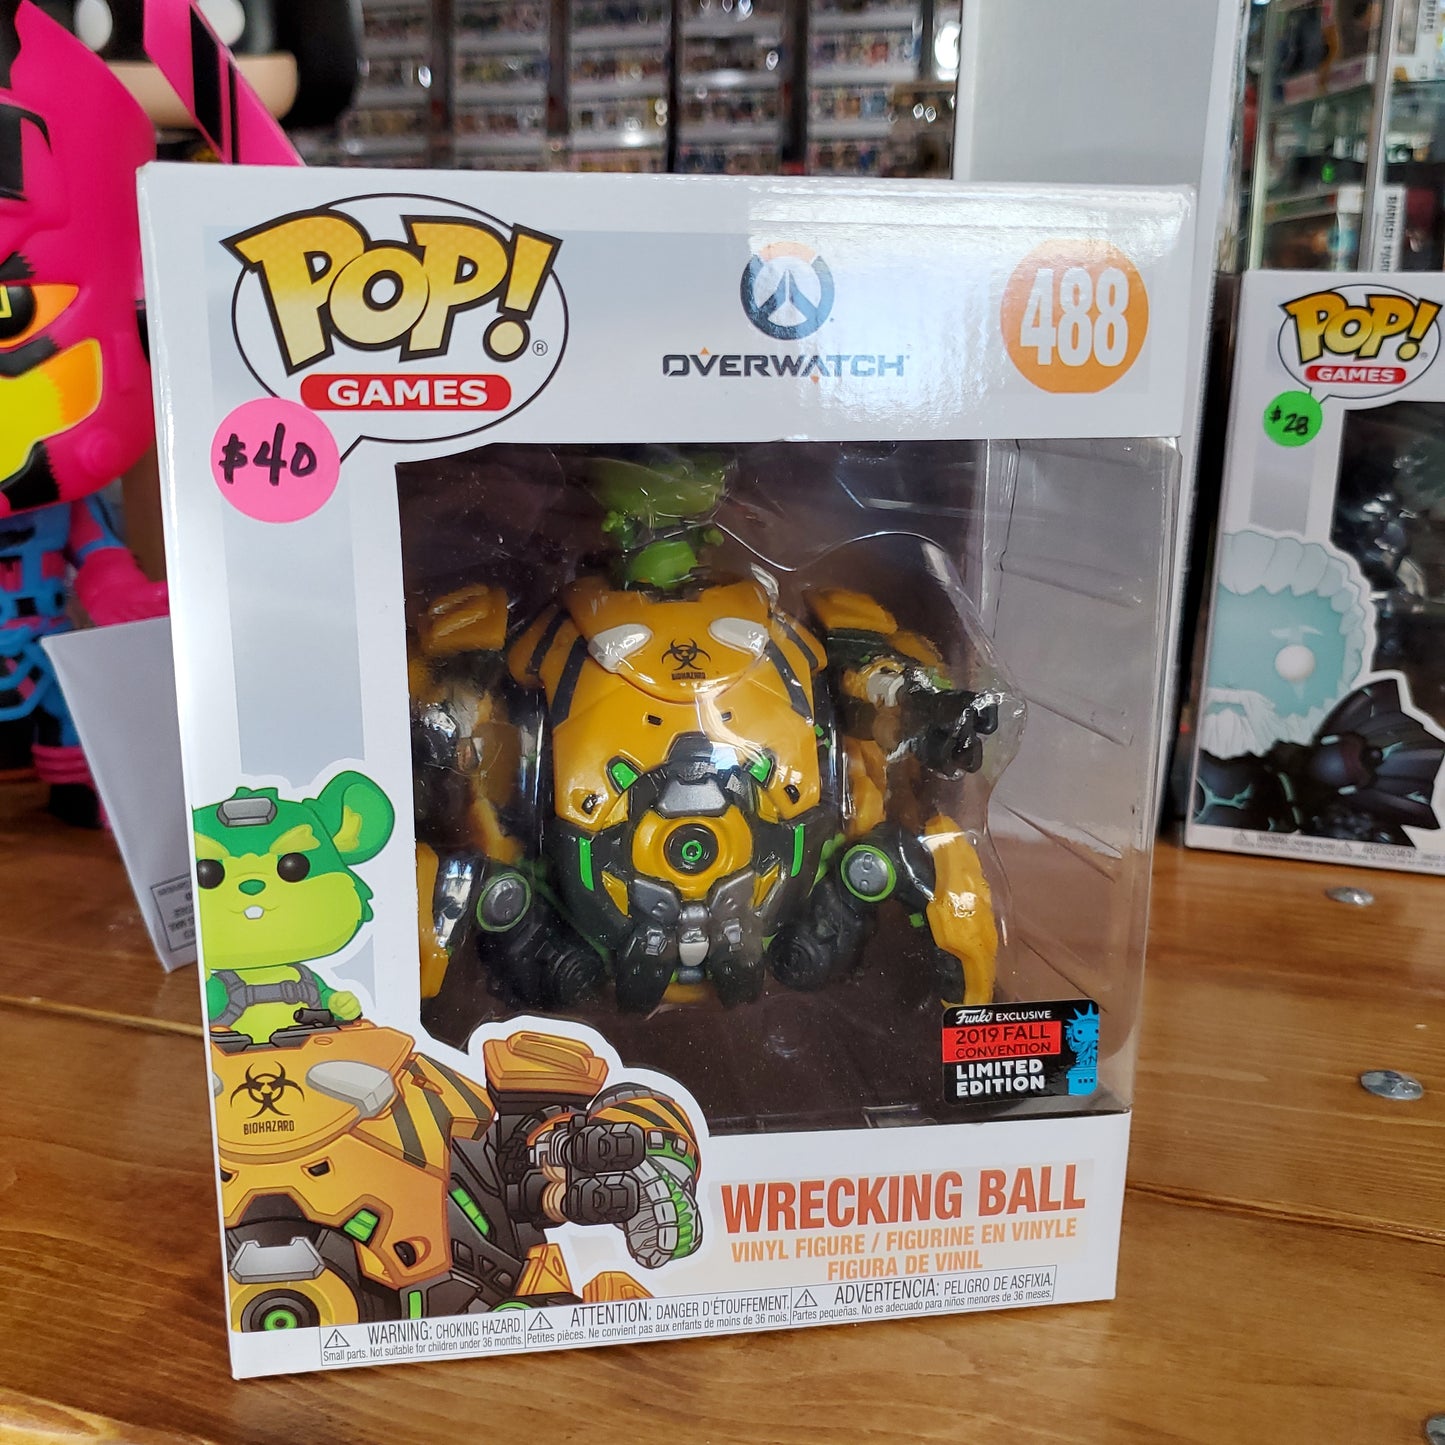 Wrecking Ball - Overwatch 2019 Funko Fall Convention Exclusive #488 - Funko Pop! Figure